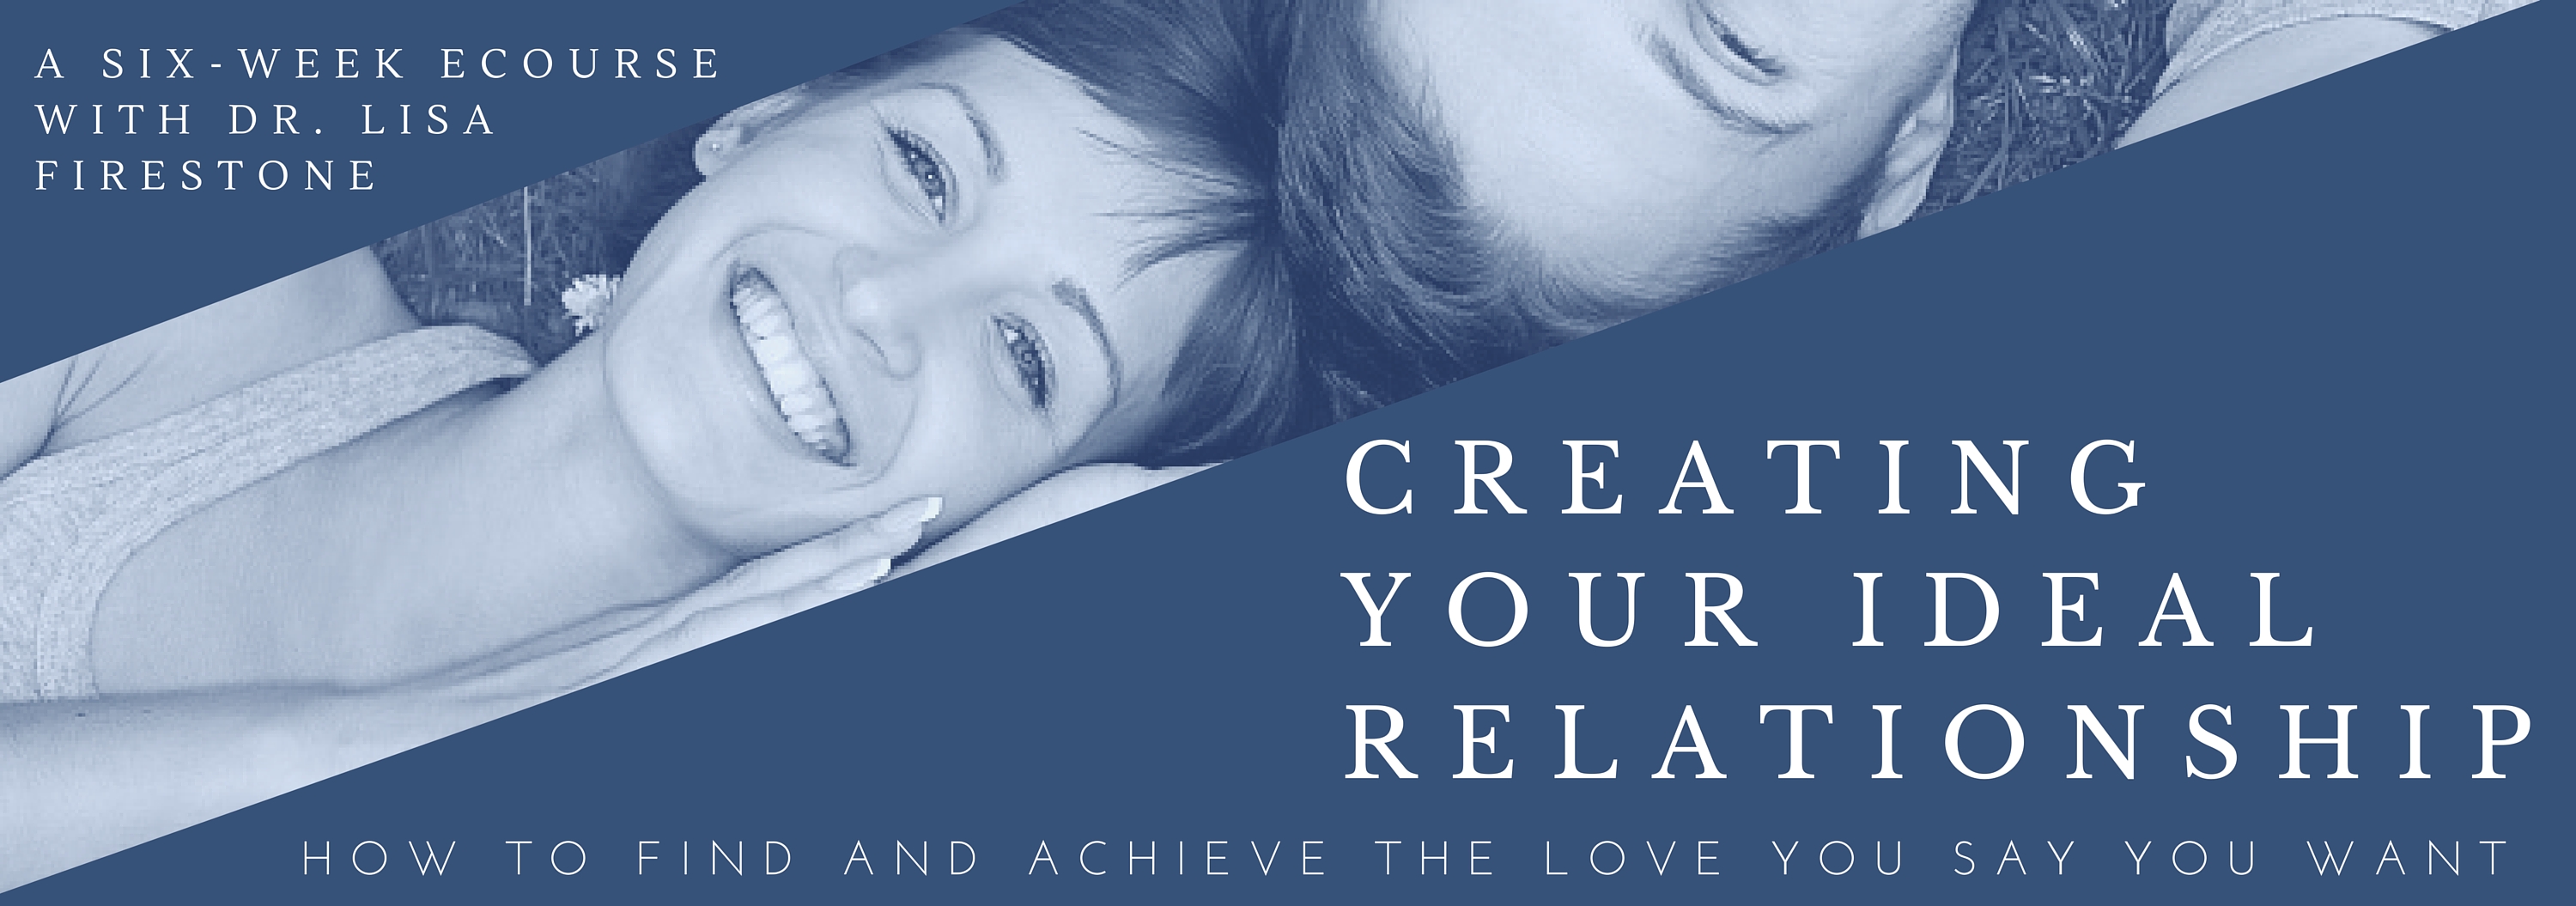 creating your ideal relationship ecourse